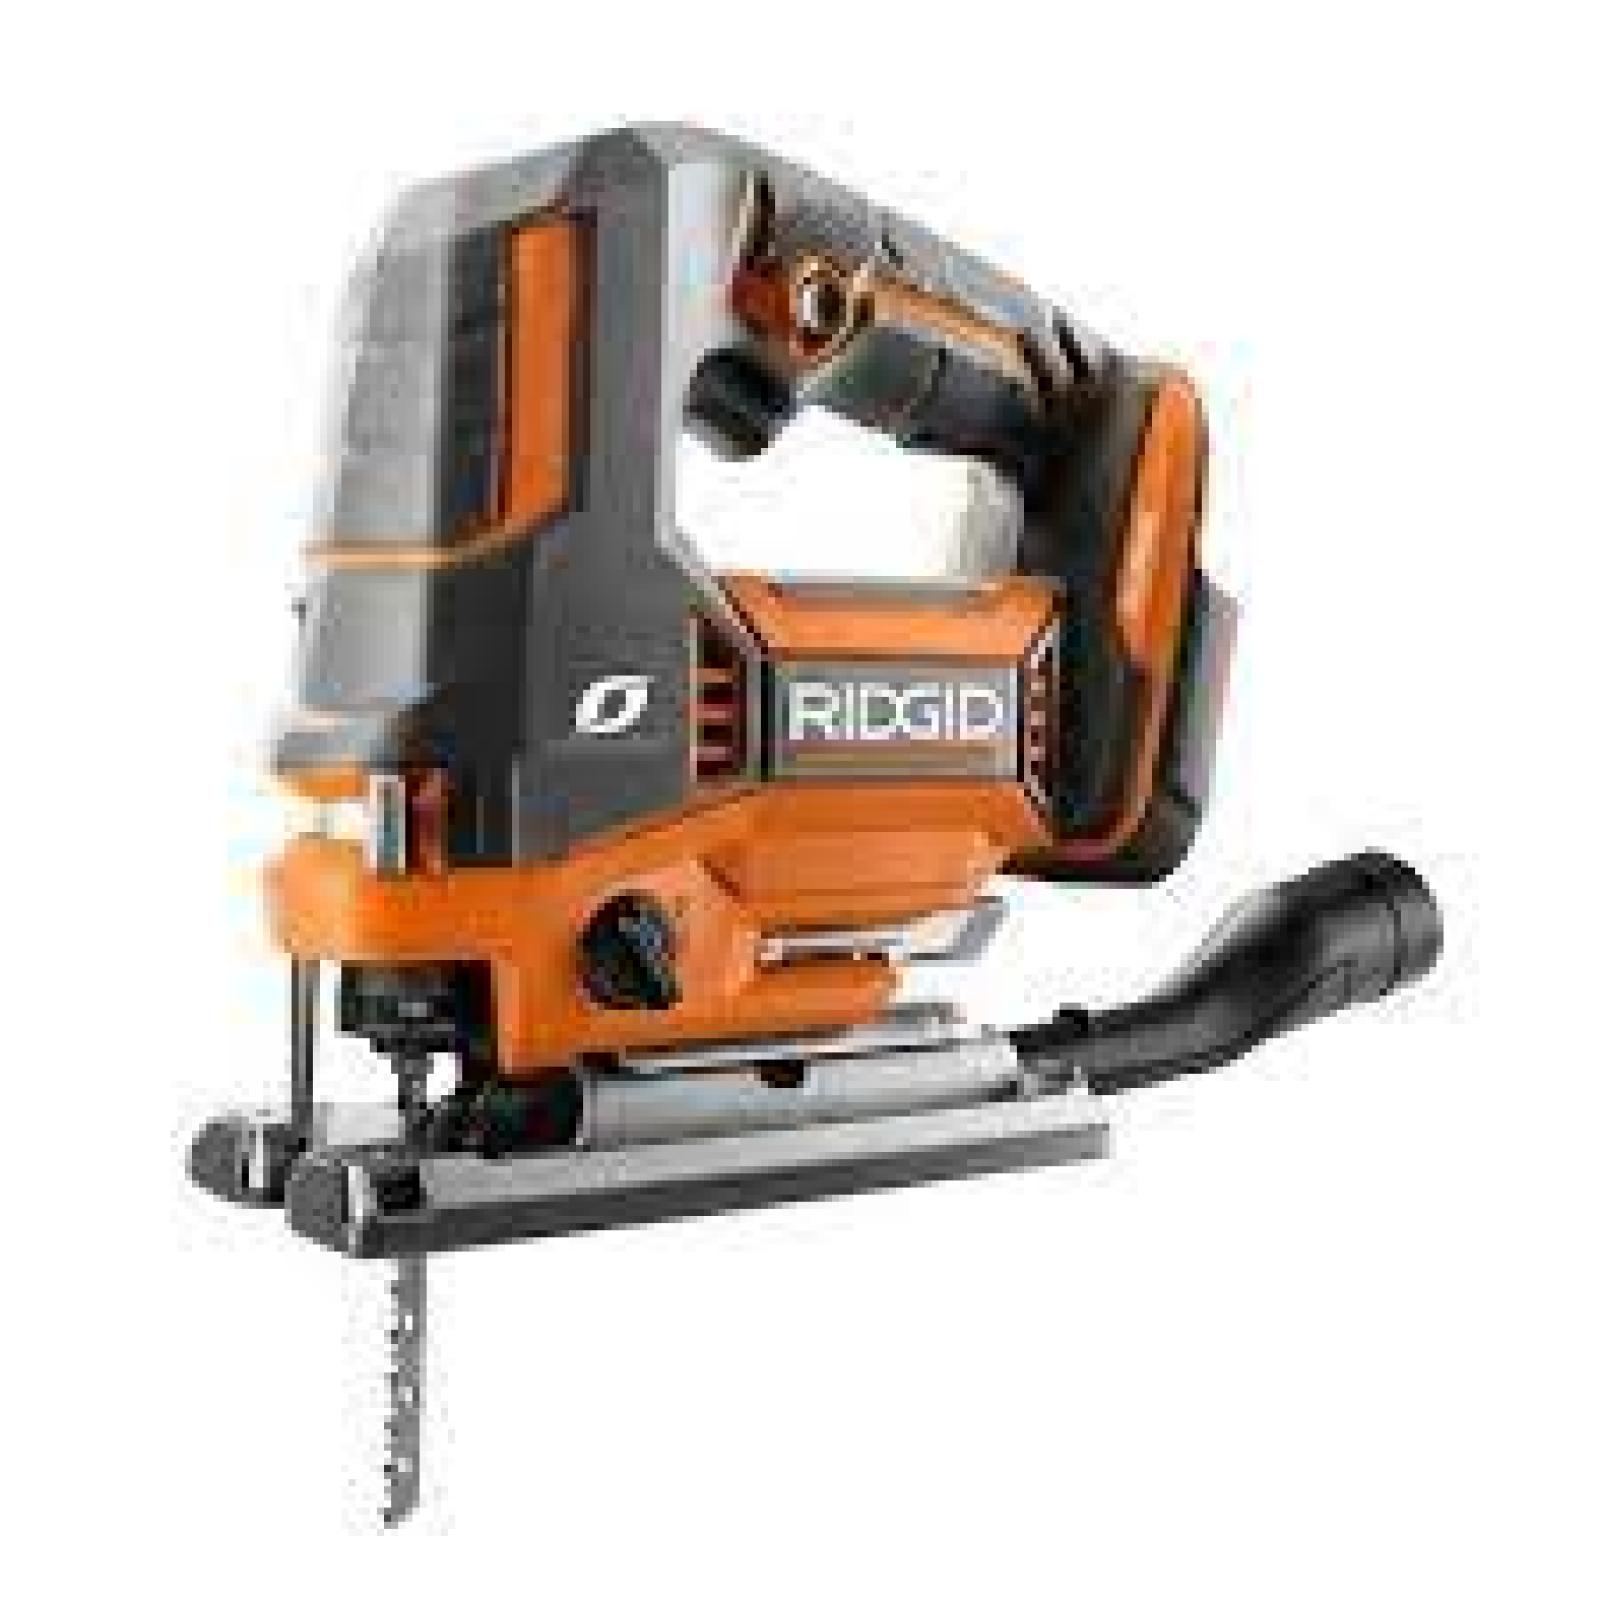 Phoenix Location Appears RIDGID 18V Brushless Cordless Jig Saw (Tool Only)